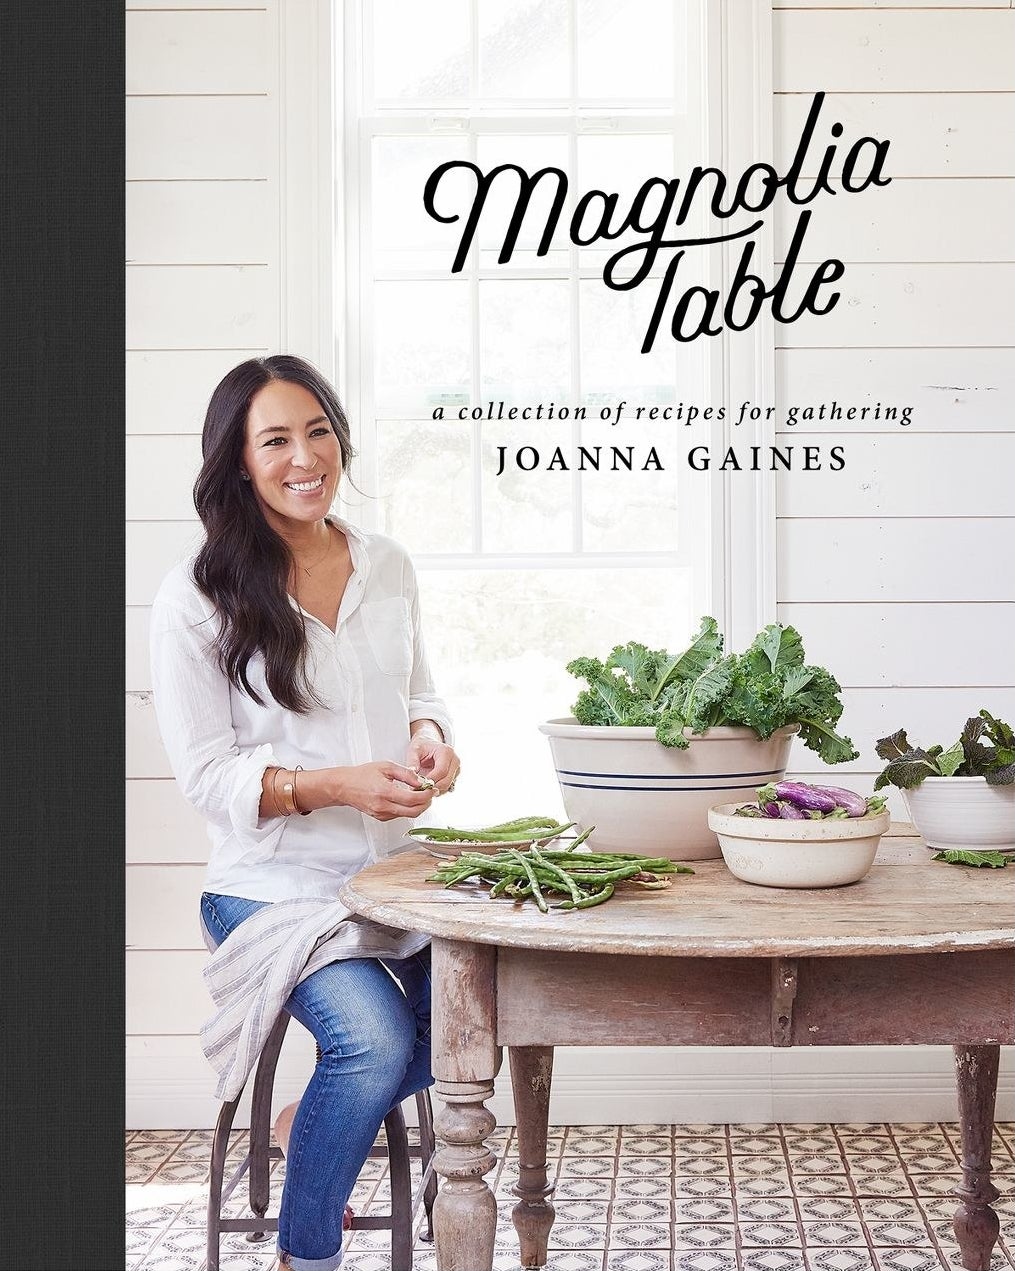 joanna gaines on the cover of her book